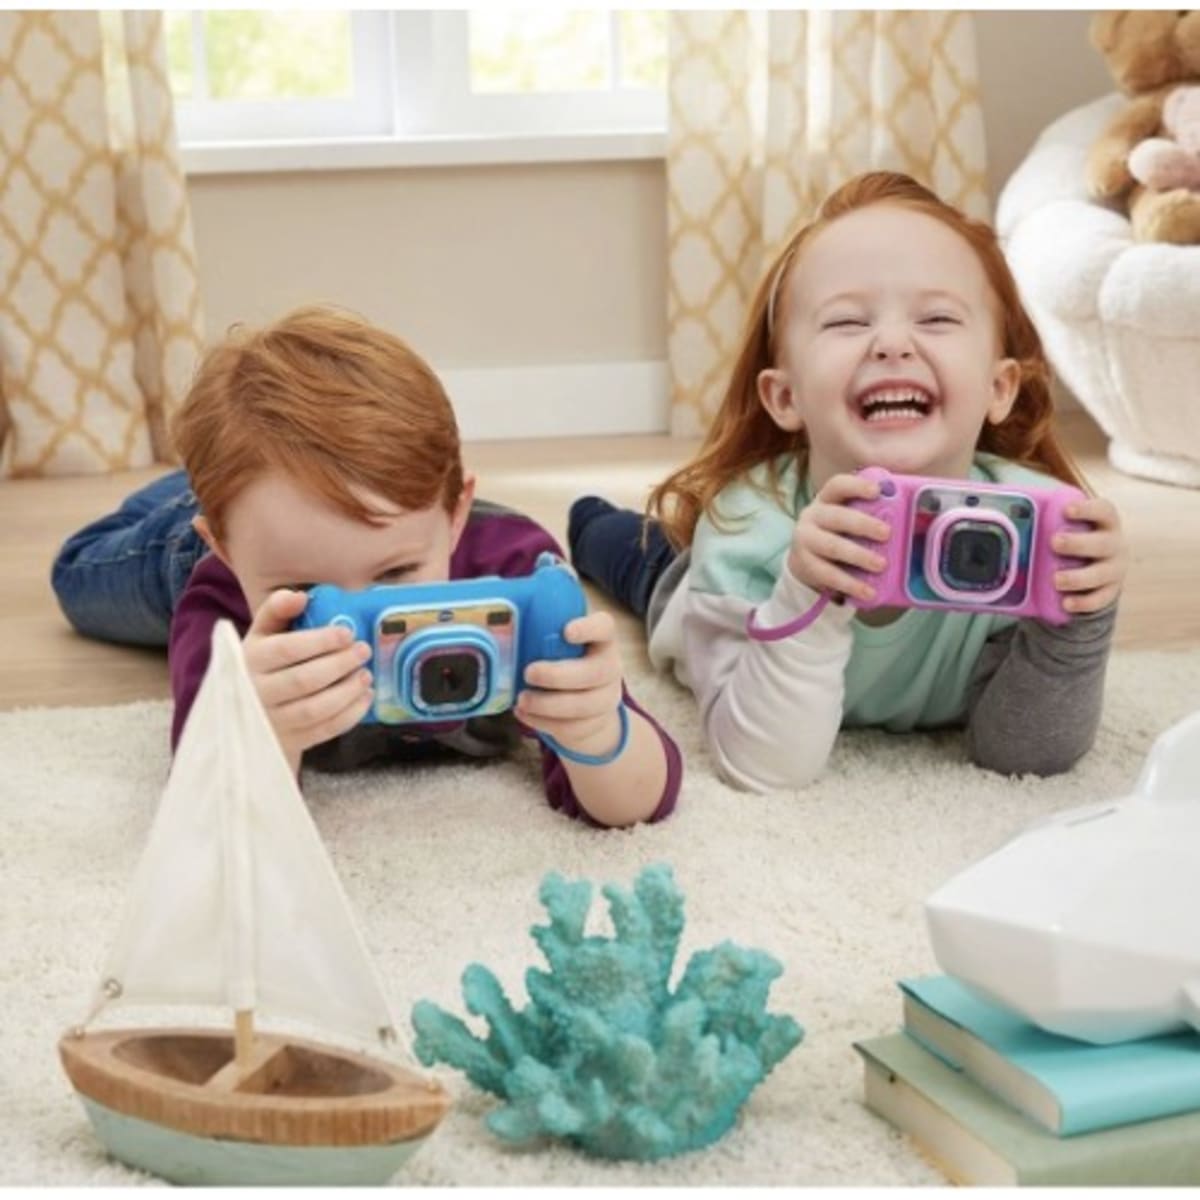 VTech KidiZoom Camera Pix Plus (Pink) with Panoramic and Talking Photos 